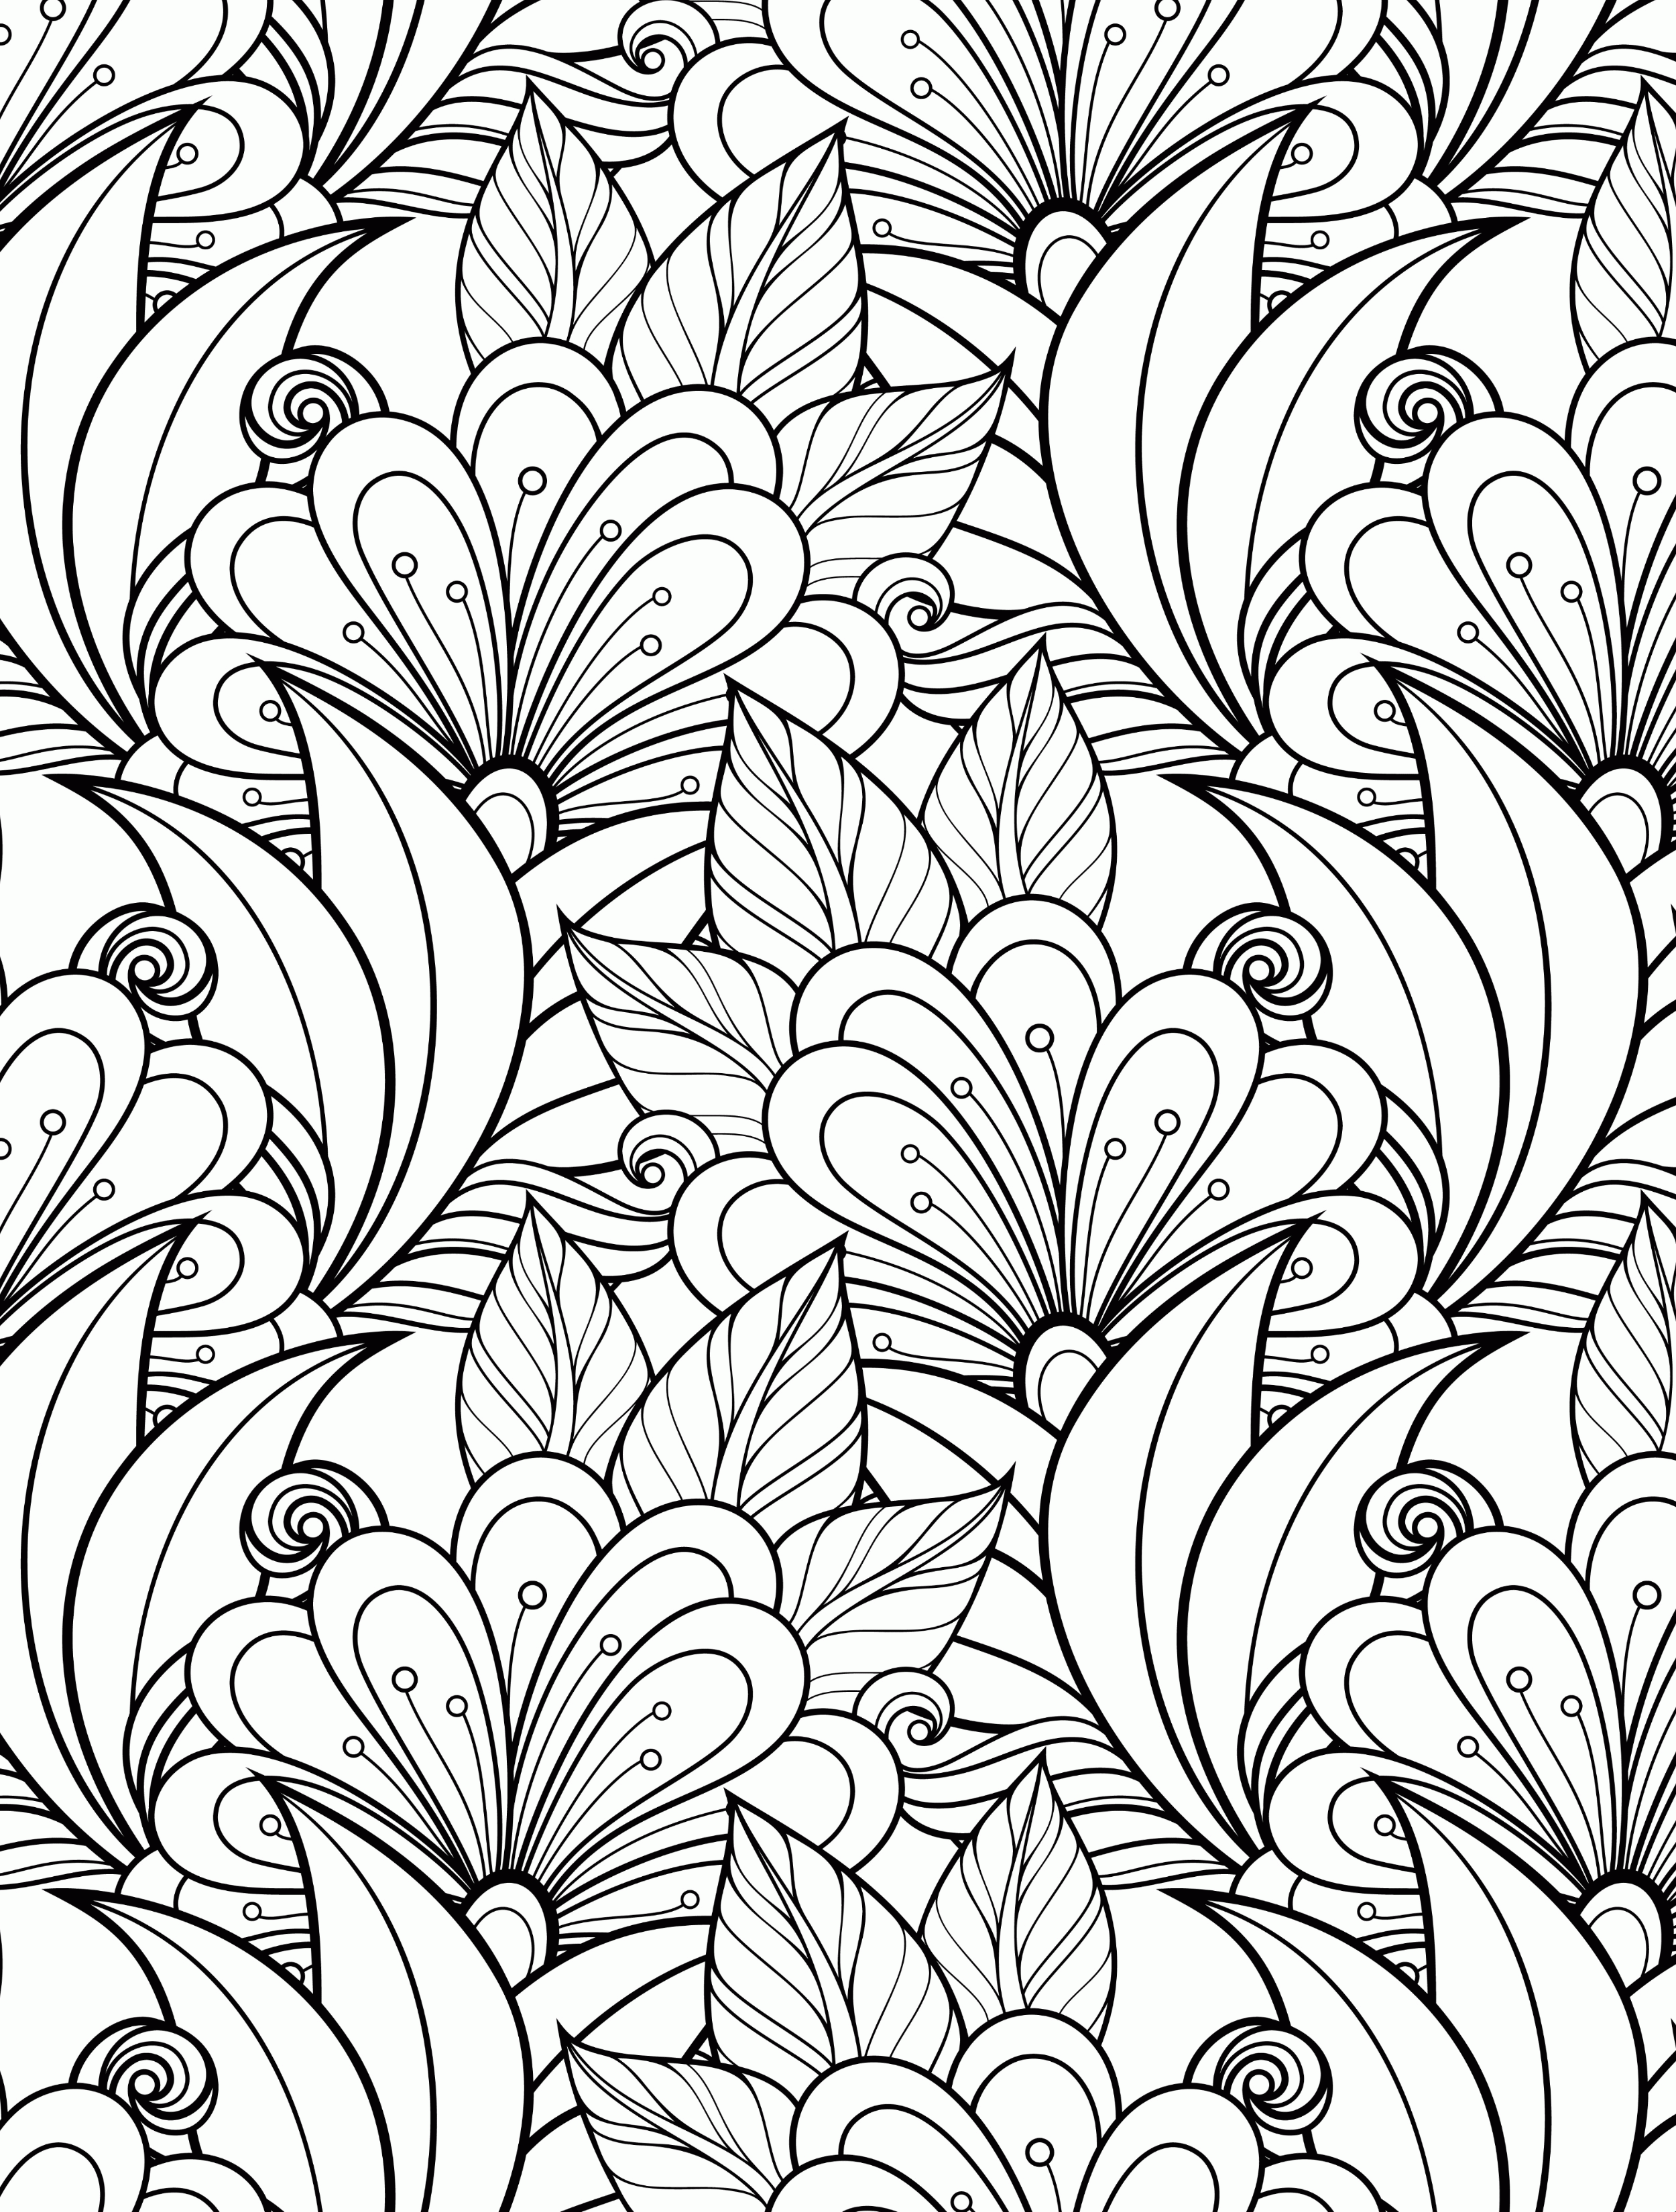 20 More Free Printable Adult Coloring Pages   Page 20 Of 20   Nerdy ...